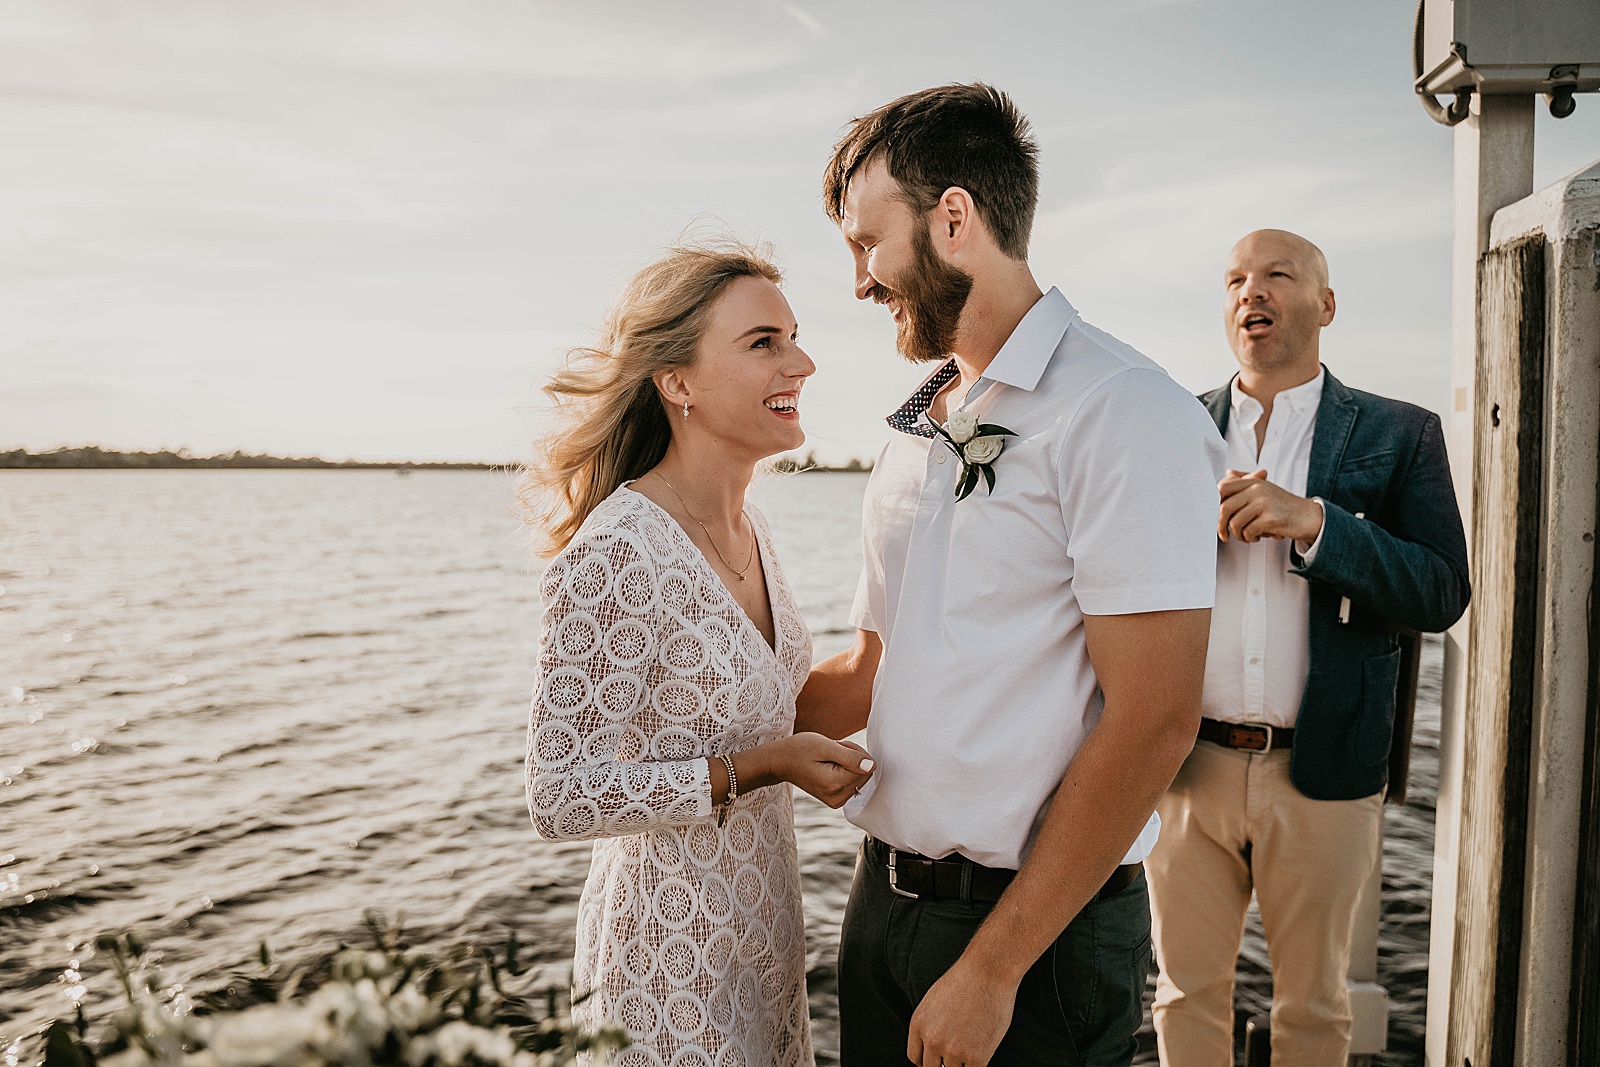 South Florida Waterfront Elopement ceremony captured by South Florida Elopement Photographer, Krystal Capone Photography